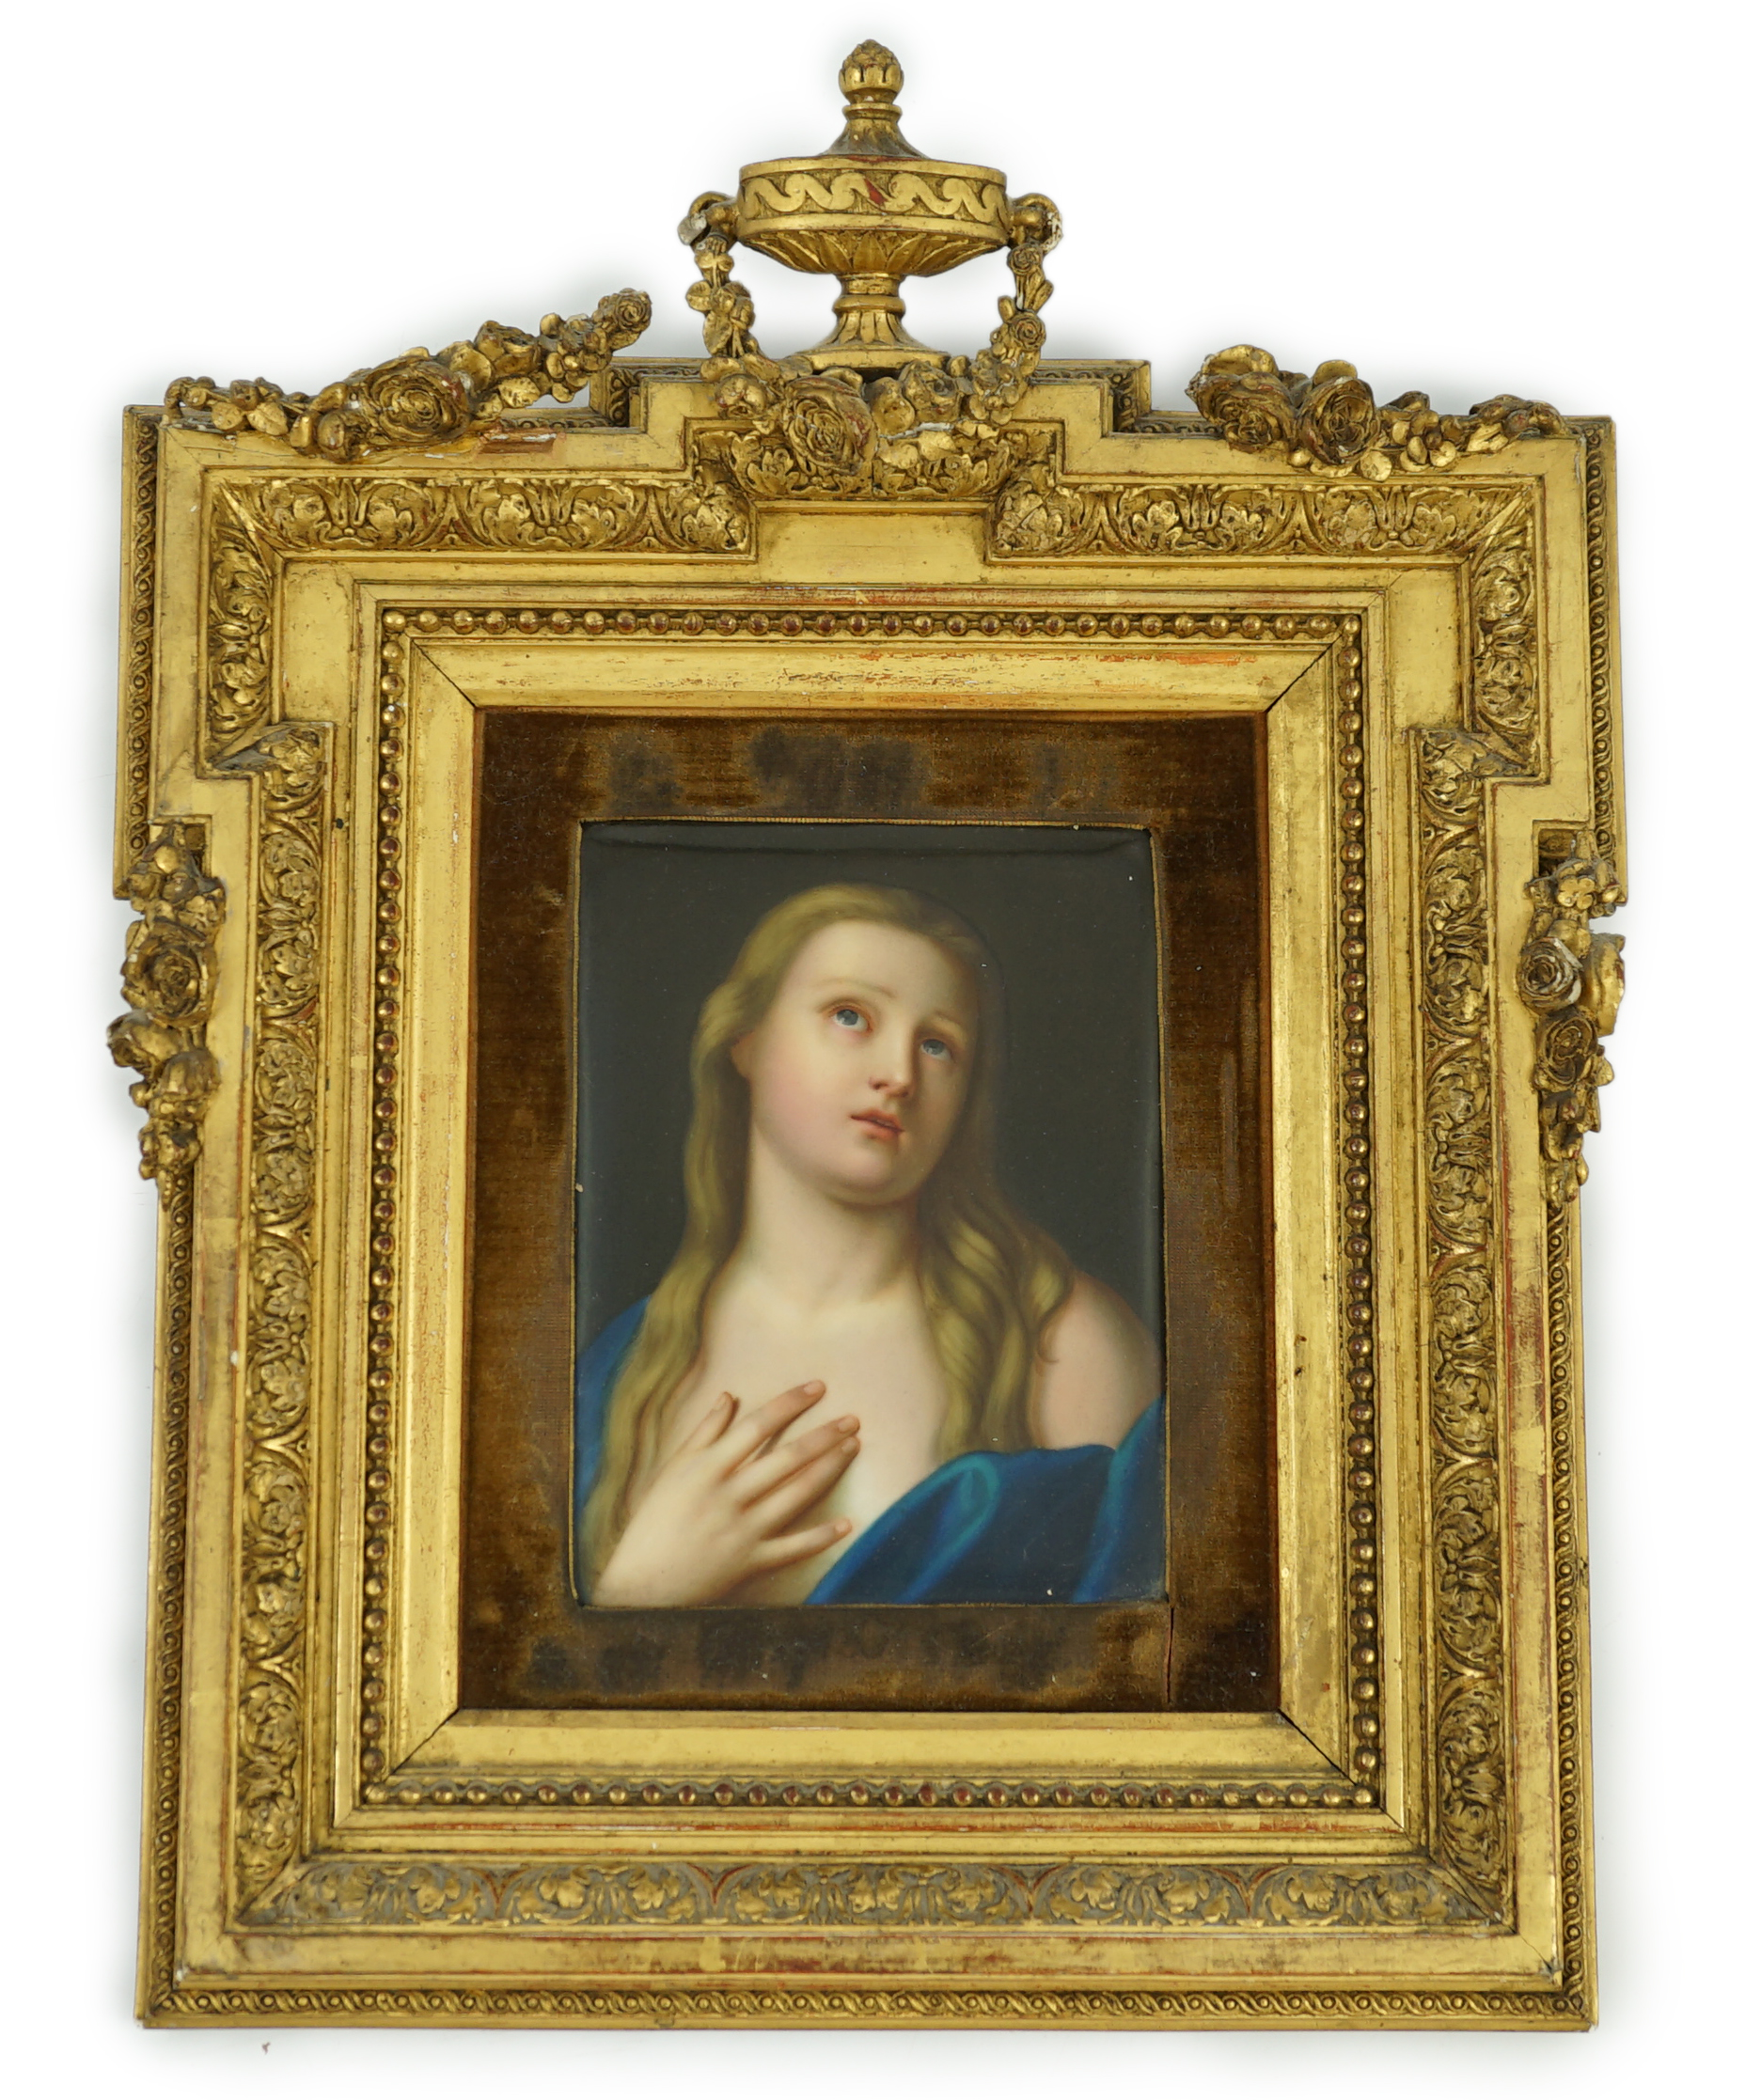 A KPM Berlin porcelain plaque of the Penitent Magdalene, after Pietro Rotari, late 19th century